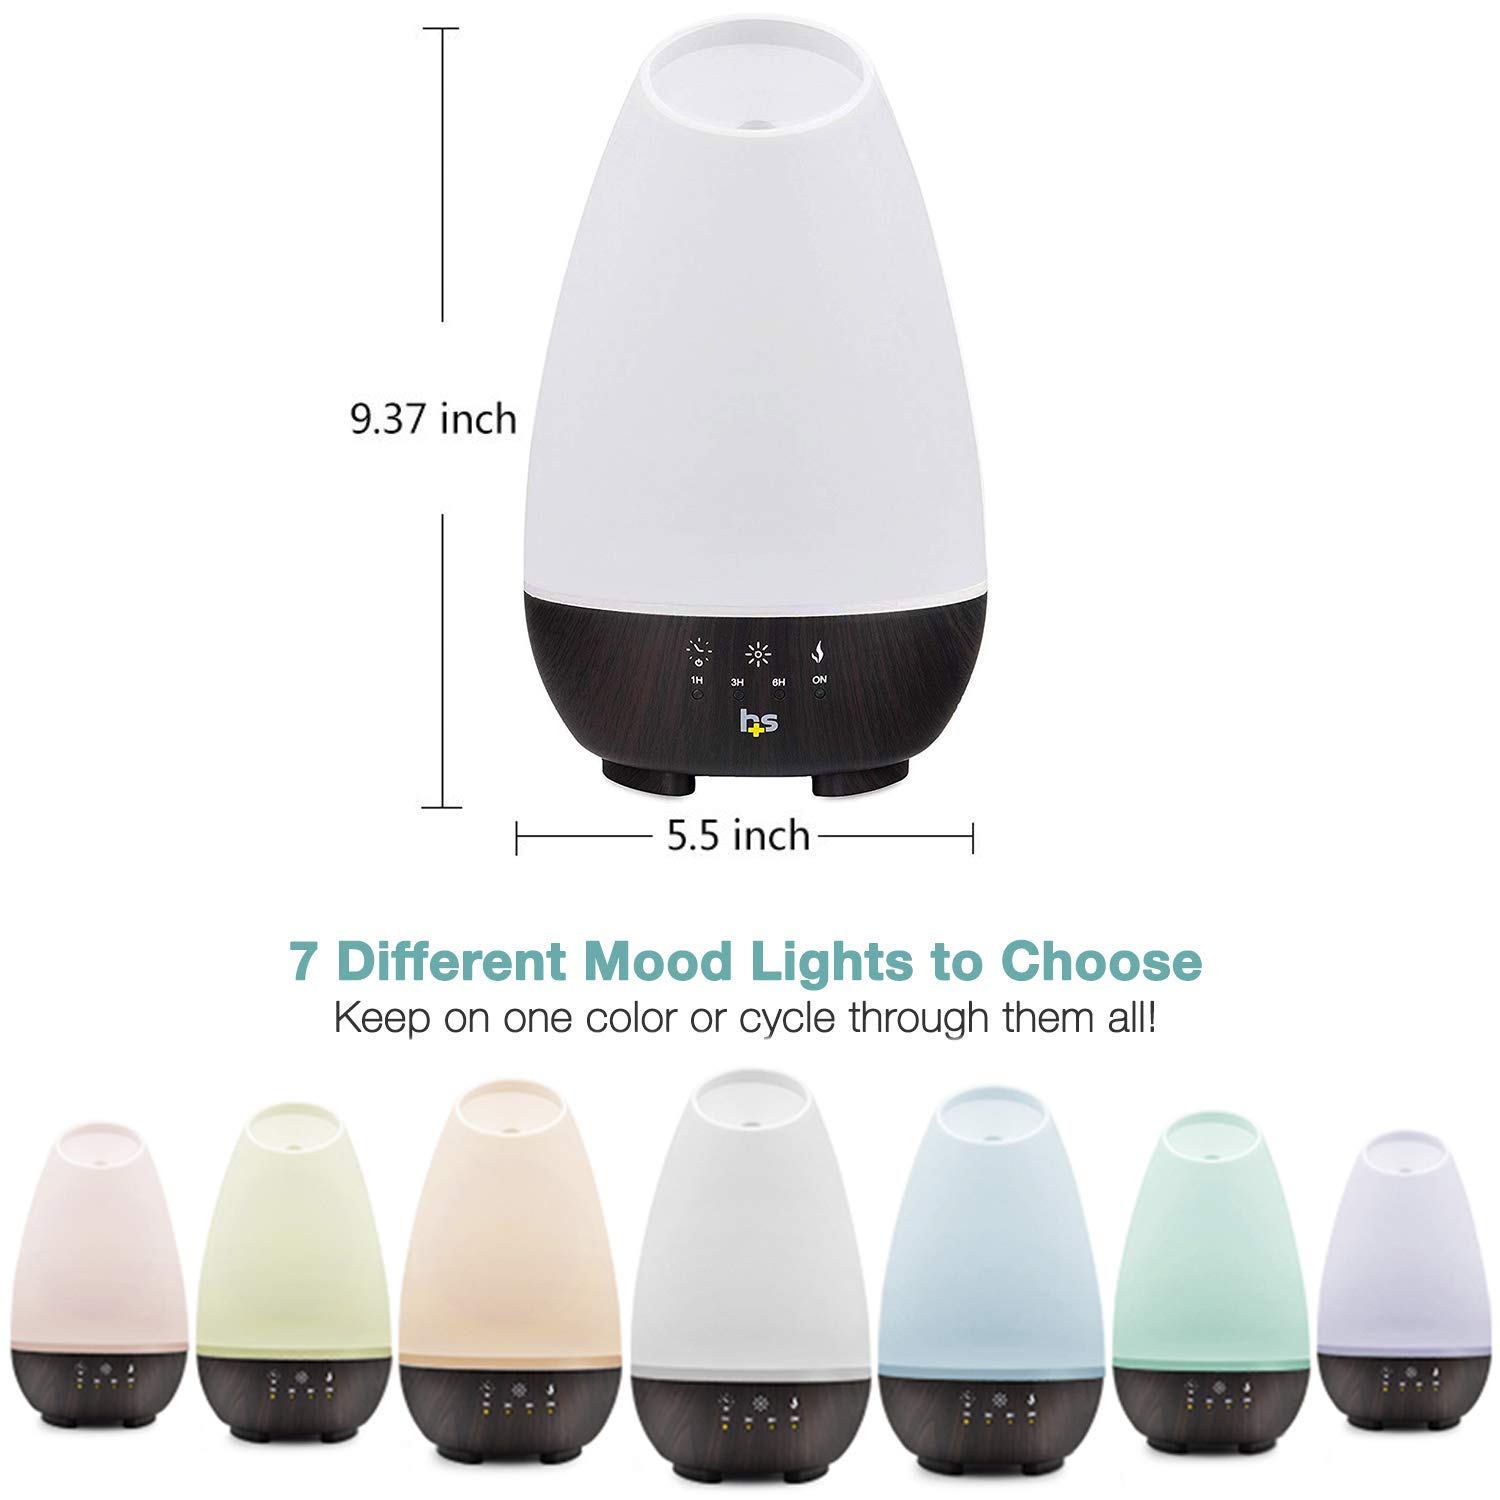 HealthSmart Essential Oil Diffuser, Cool Mist Humidifier and Aromatherapy Diffuser with 500ML Tank Ideal for Large Rooms, Adjustable Timer, Mist Mode and 7 LED Light Colors, White (Pack of 16)